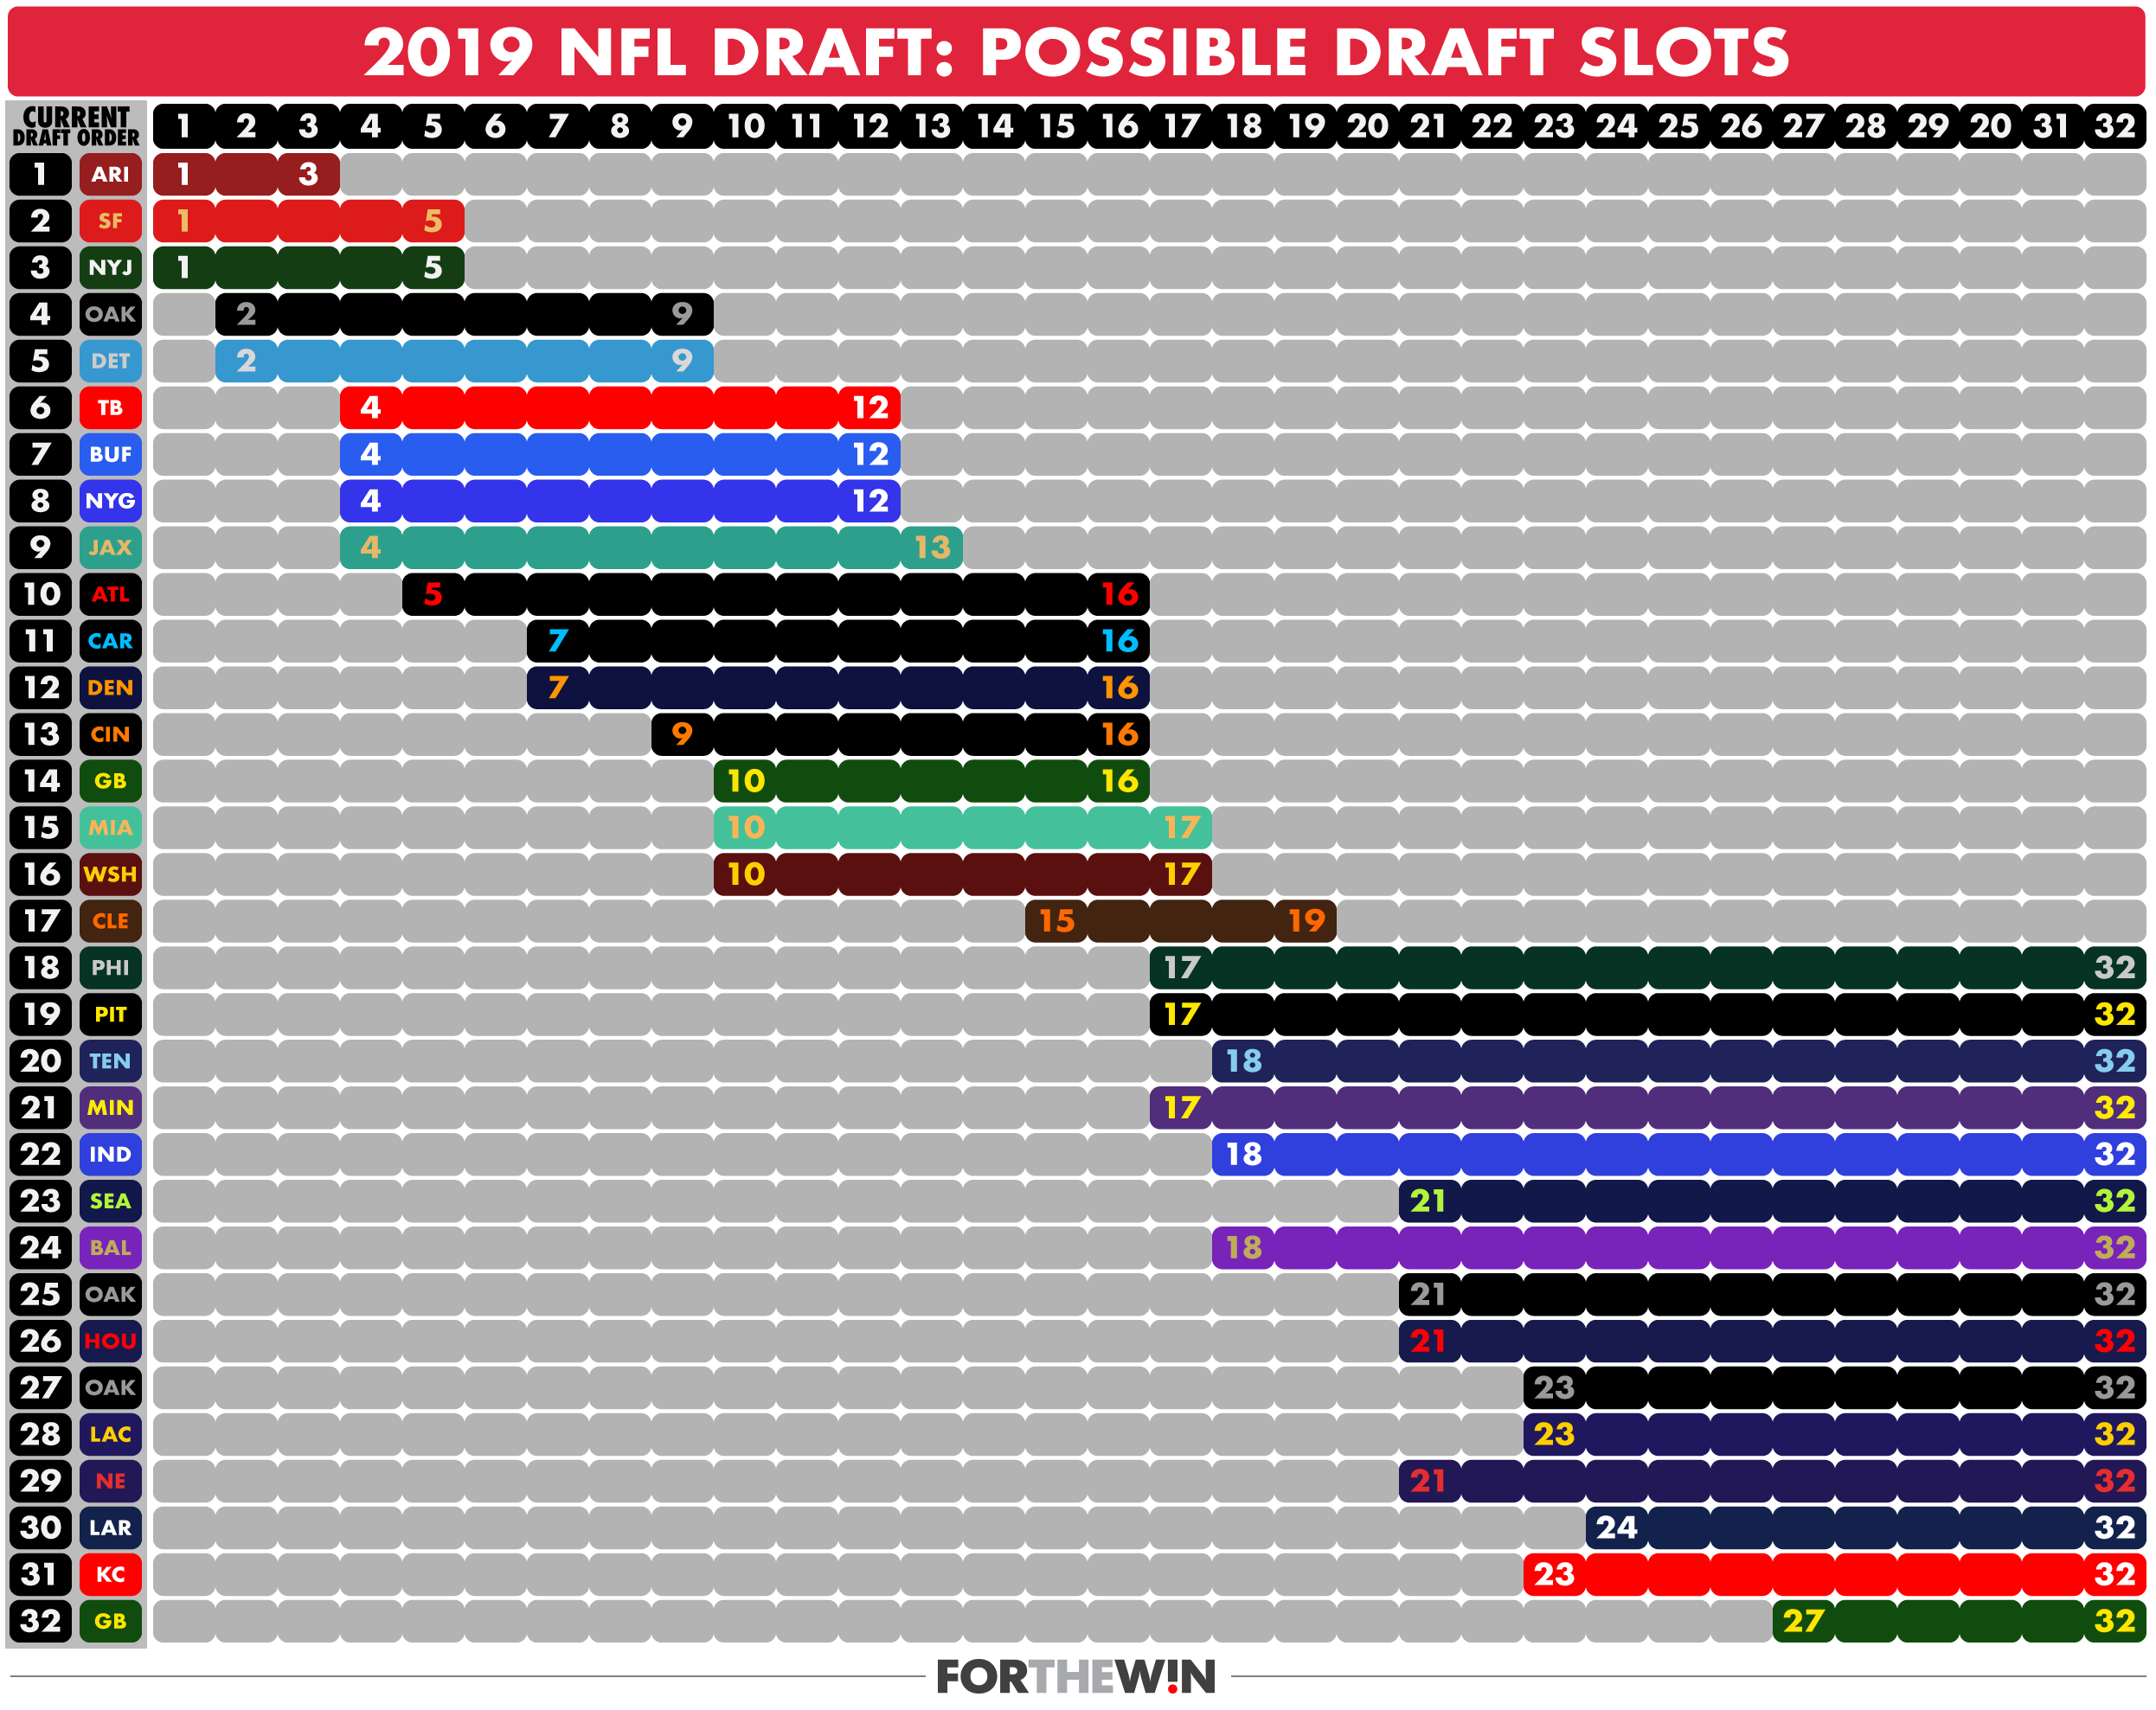 A visual guide to the current 2019 NFL draft order